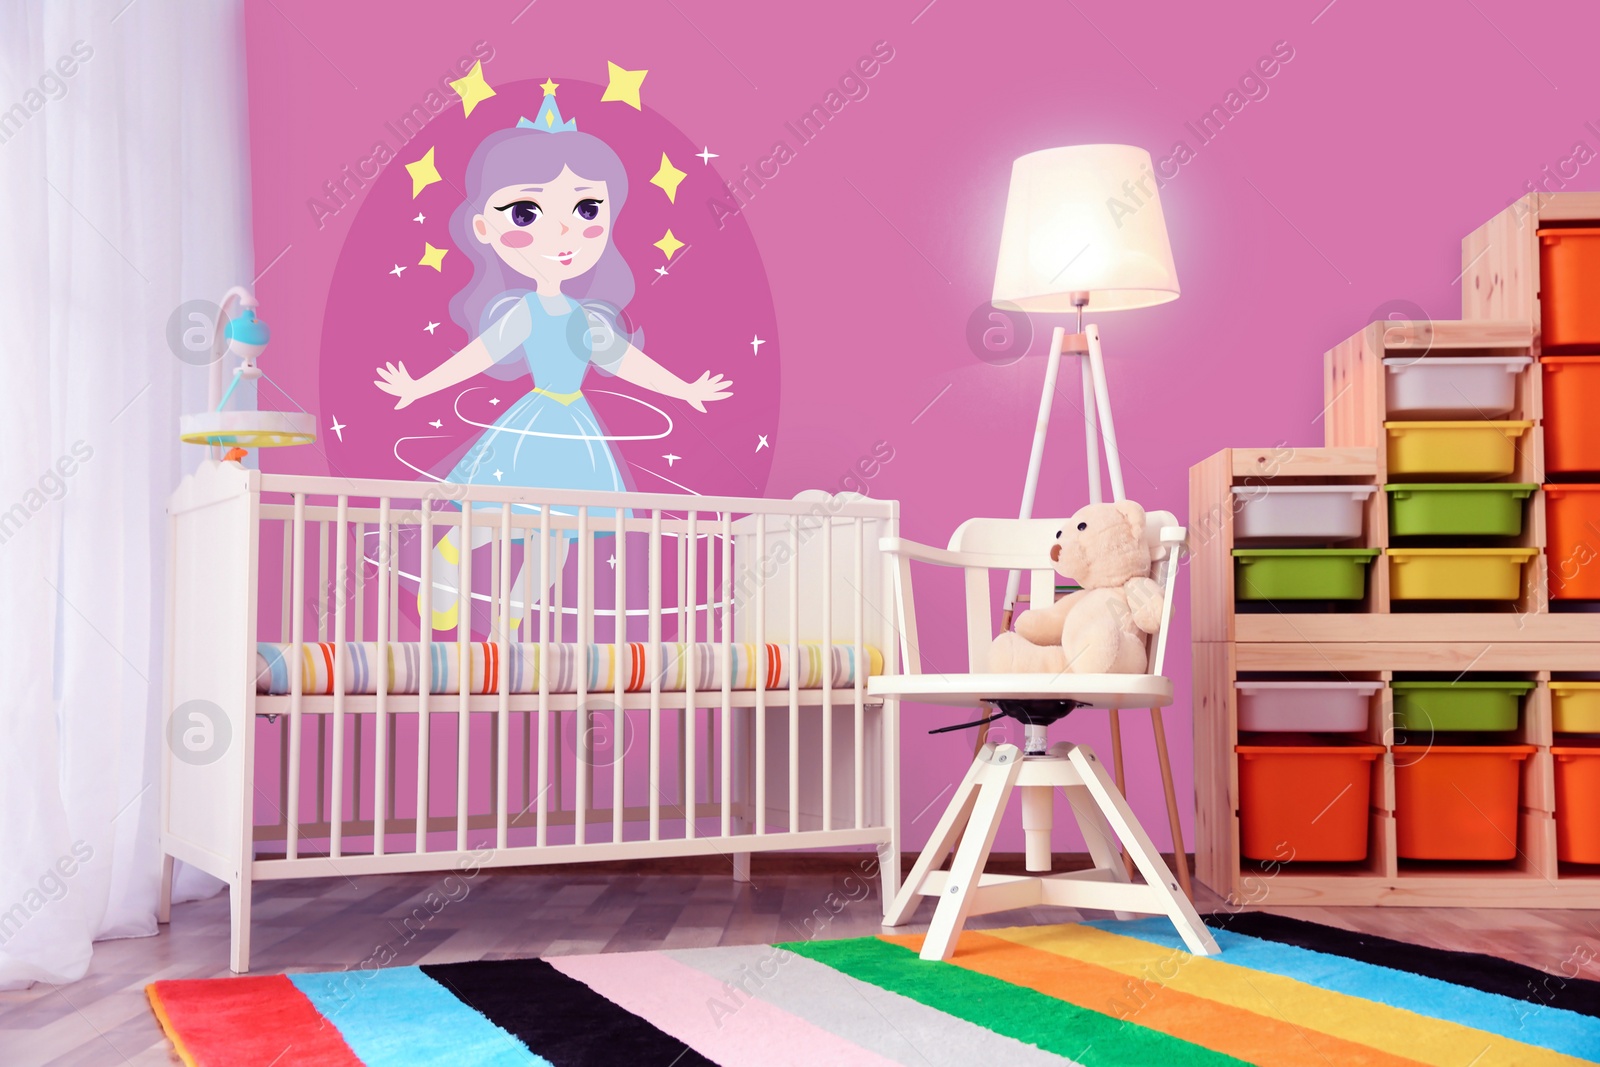 Image of Baby room interior with crib near window. Pink wallpapers with princess